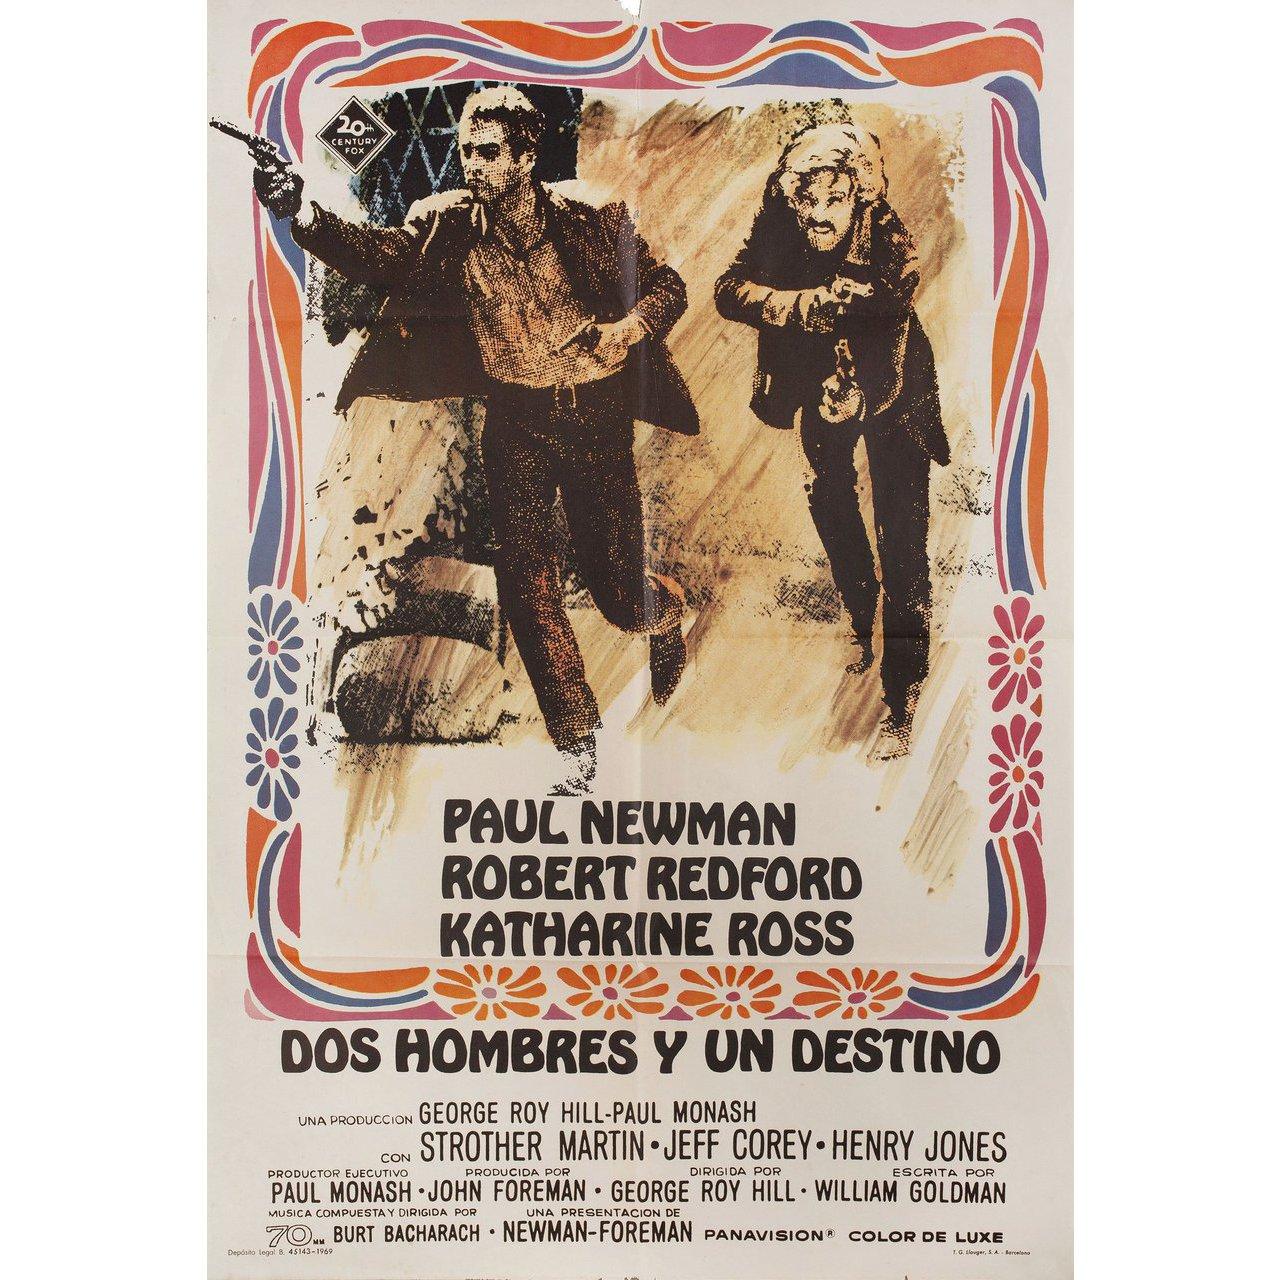 Original 1969 Spanish B1 poster for the film Butch Cassidy and the Sundance Kid directed by George Roy Hill with Paul Newman / Robert Redford / Katharine Ross / Strother Martin. Very good condition, folded with fold wear. Many original posters were